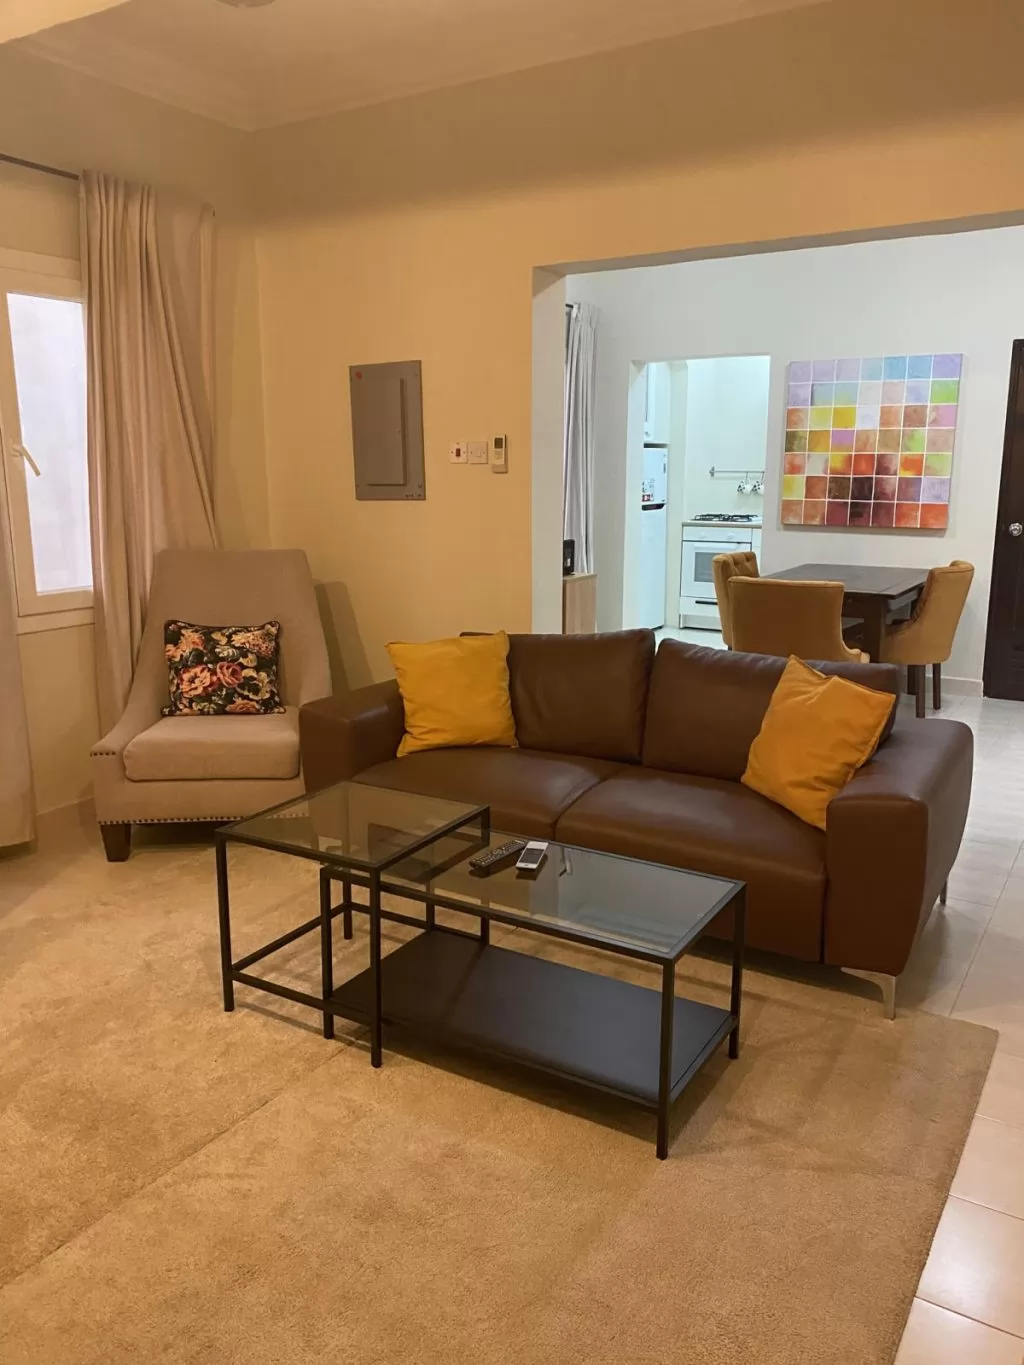 Residential Property 1 Bedroom F/F Apartment  for rent in Onaiza , Doha-Qatar #13369 - 1  image 